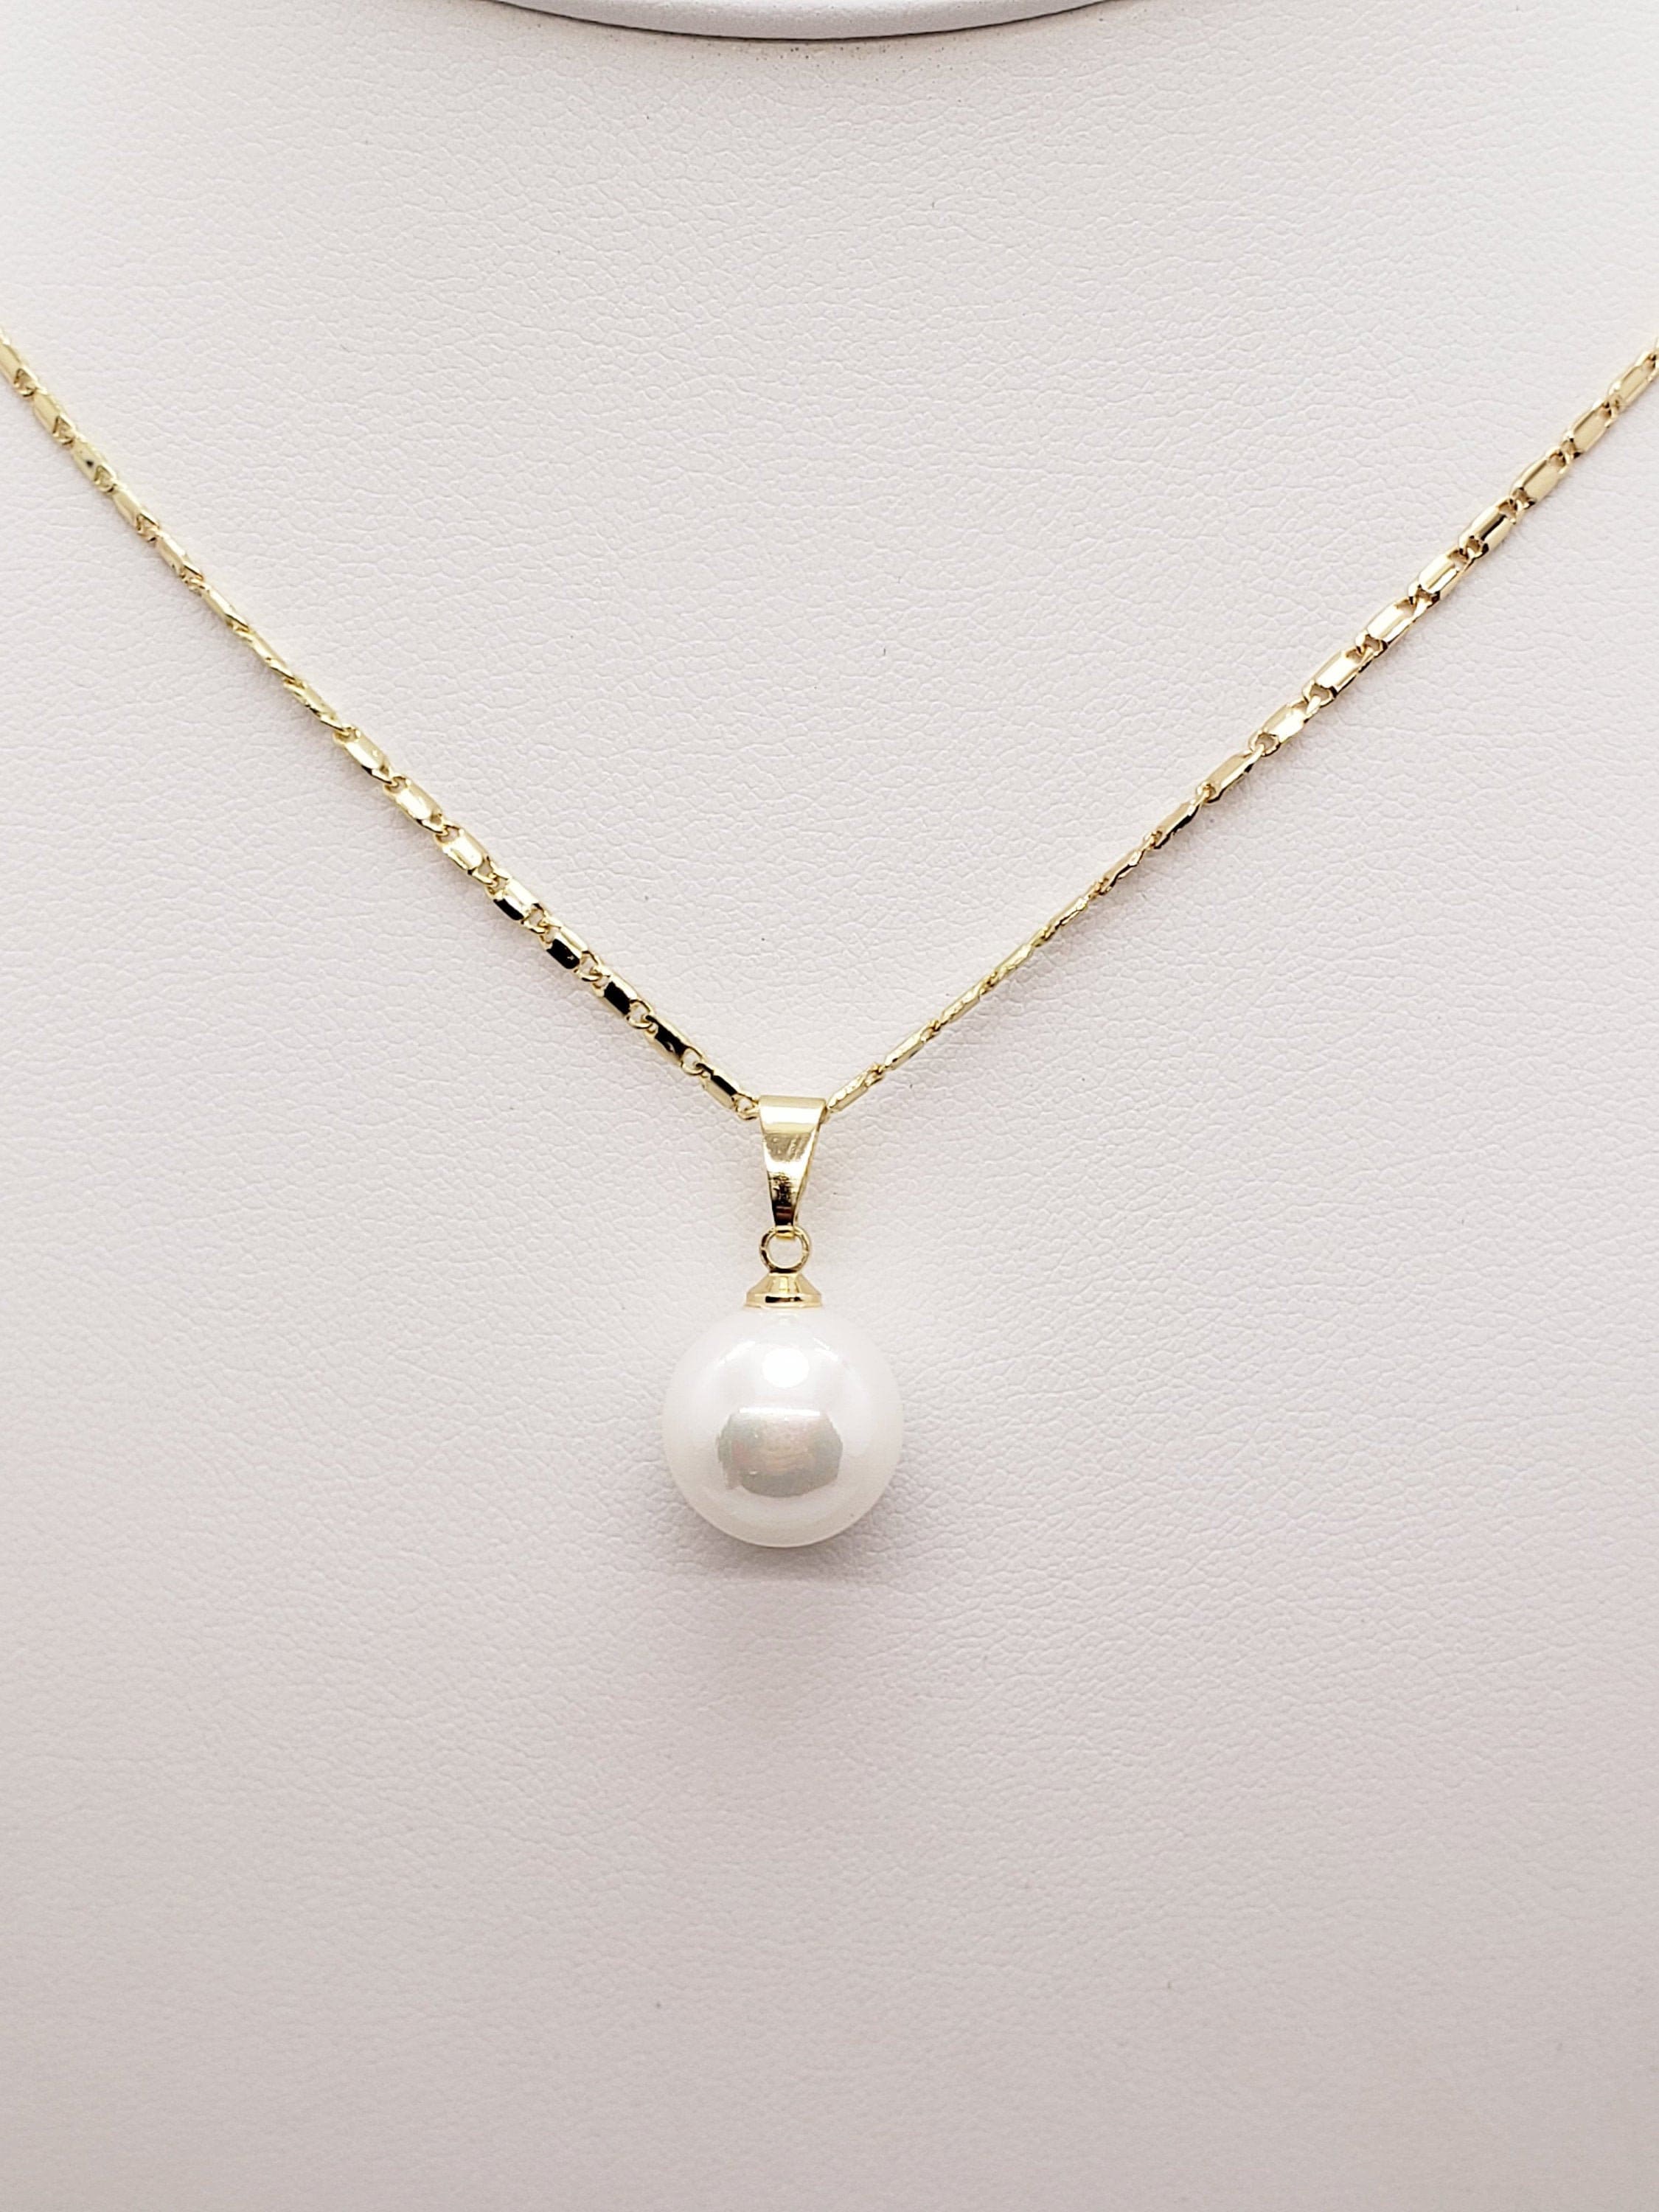 White Pearl Necklace White Pearl Pendant Gold Chain - Etsy